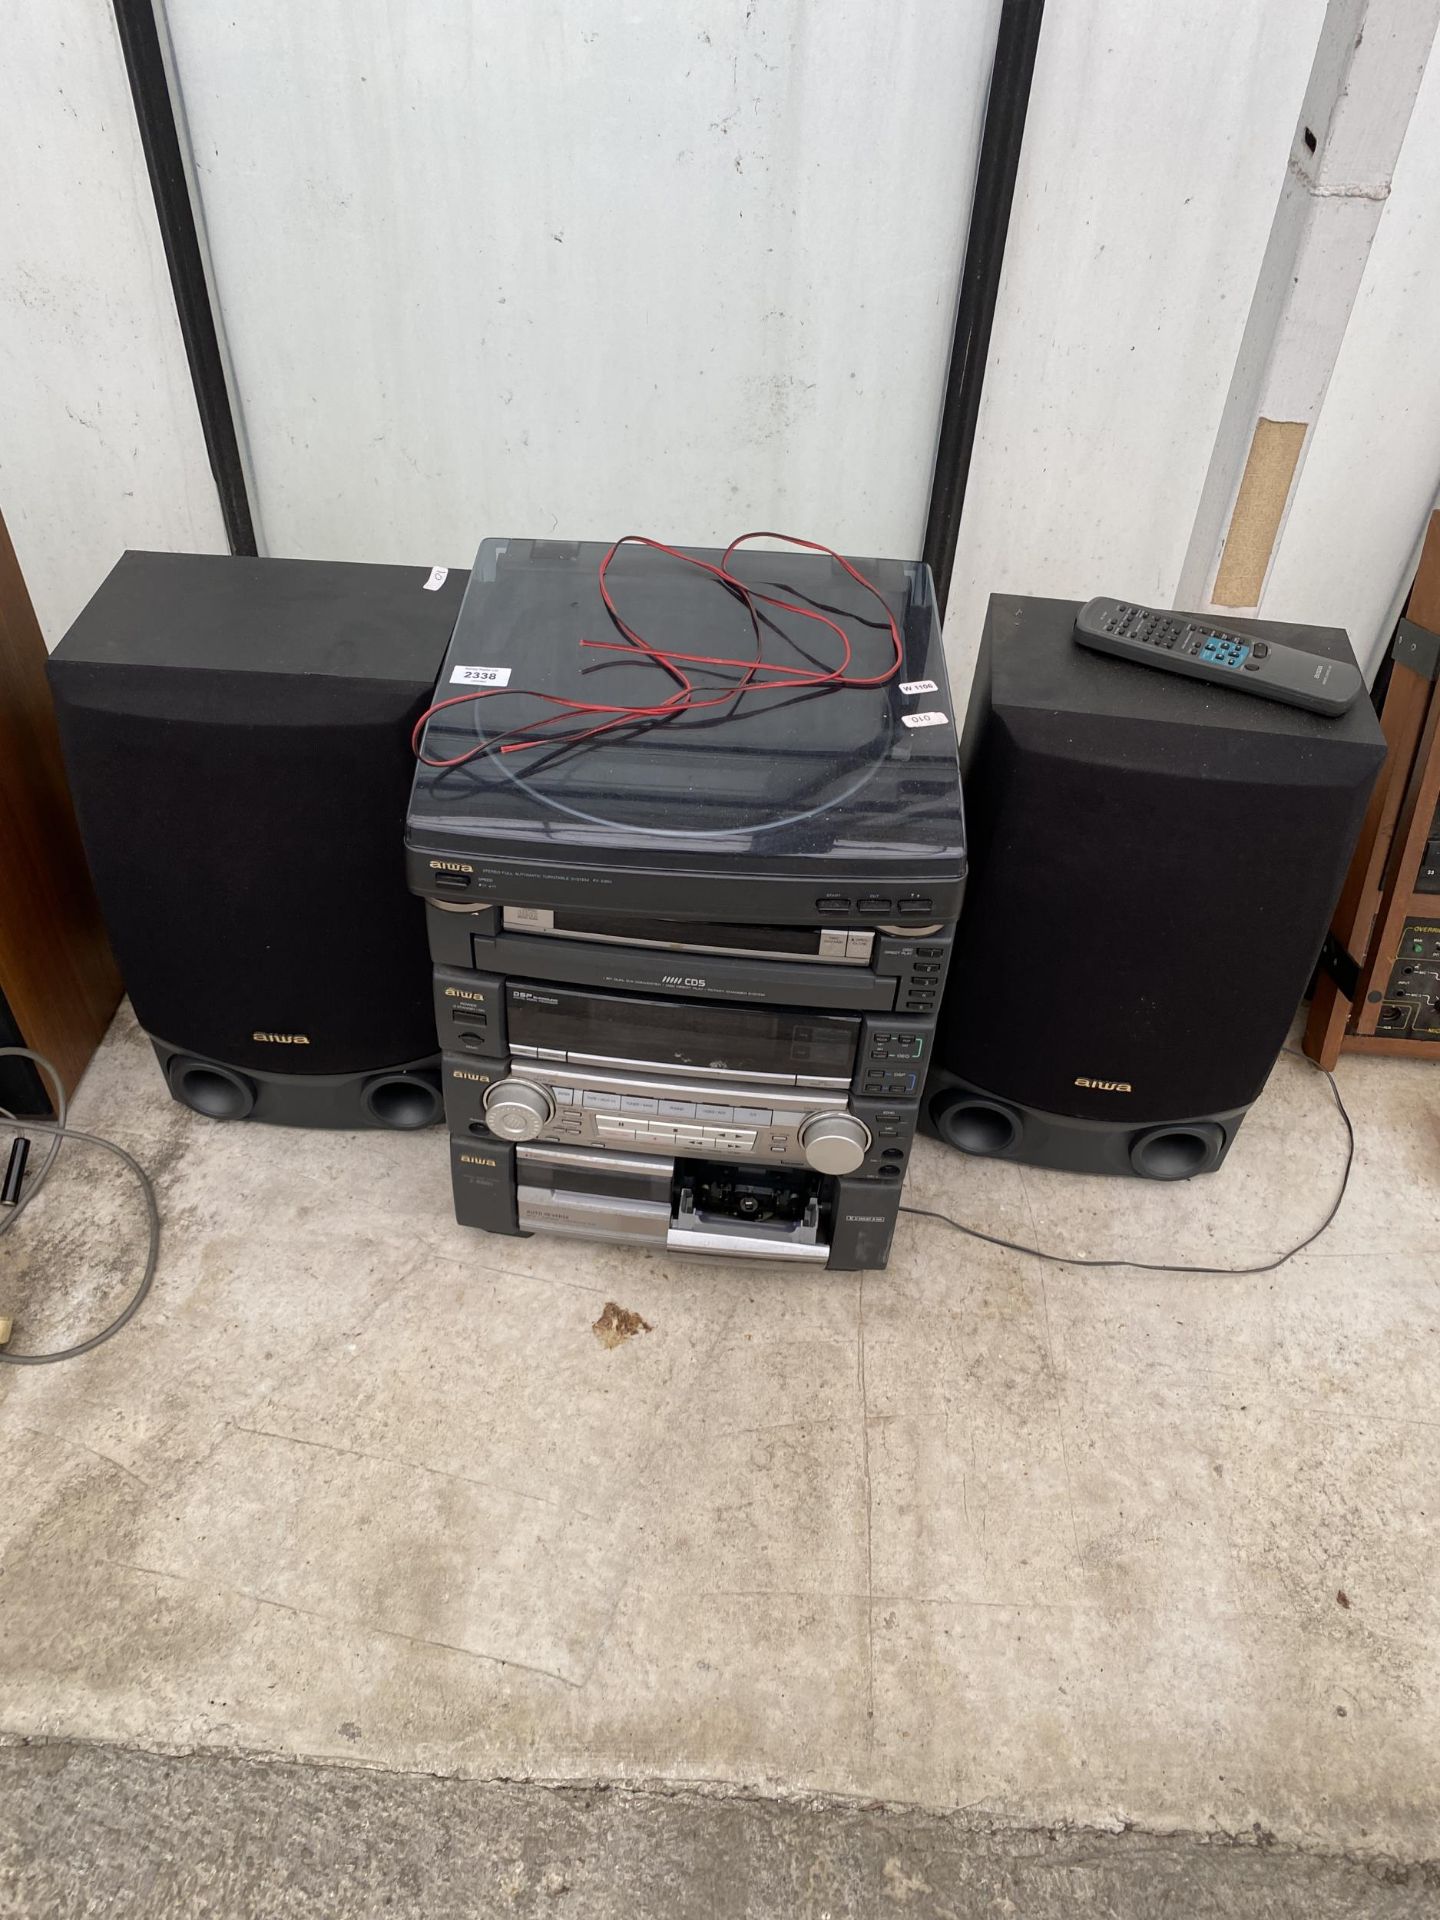 AN AIWA 5 PIECE SEPERATES HIFI SYSTEM WITH REMOTE CONTROL AND SPEAKERS